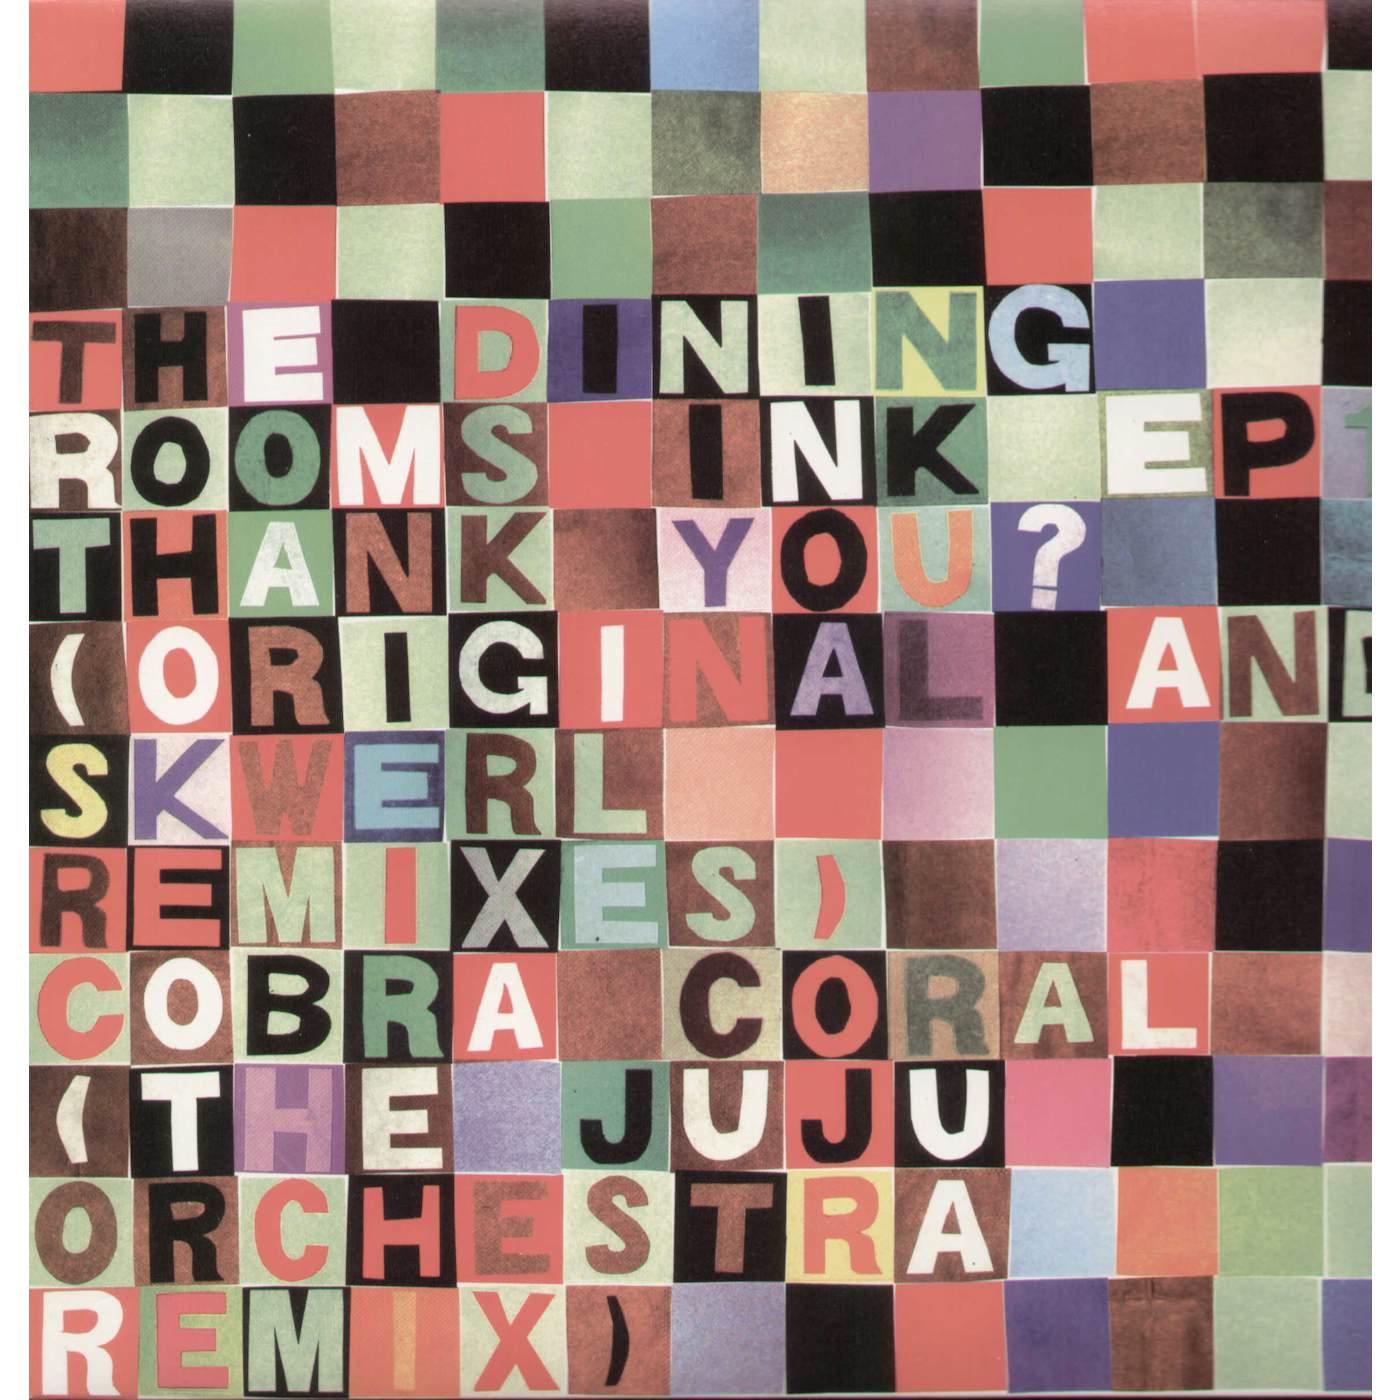 The Dining Rooms INK 1-THANK YOU REMIX B Vinyl Record